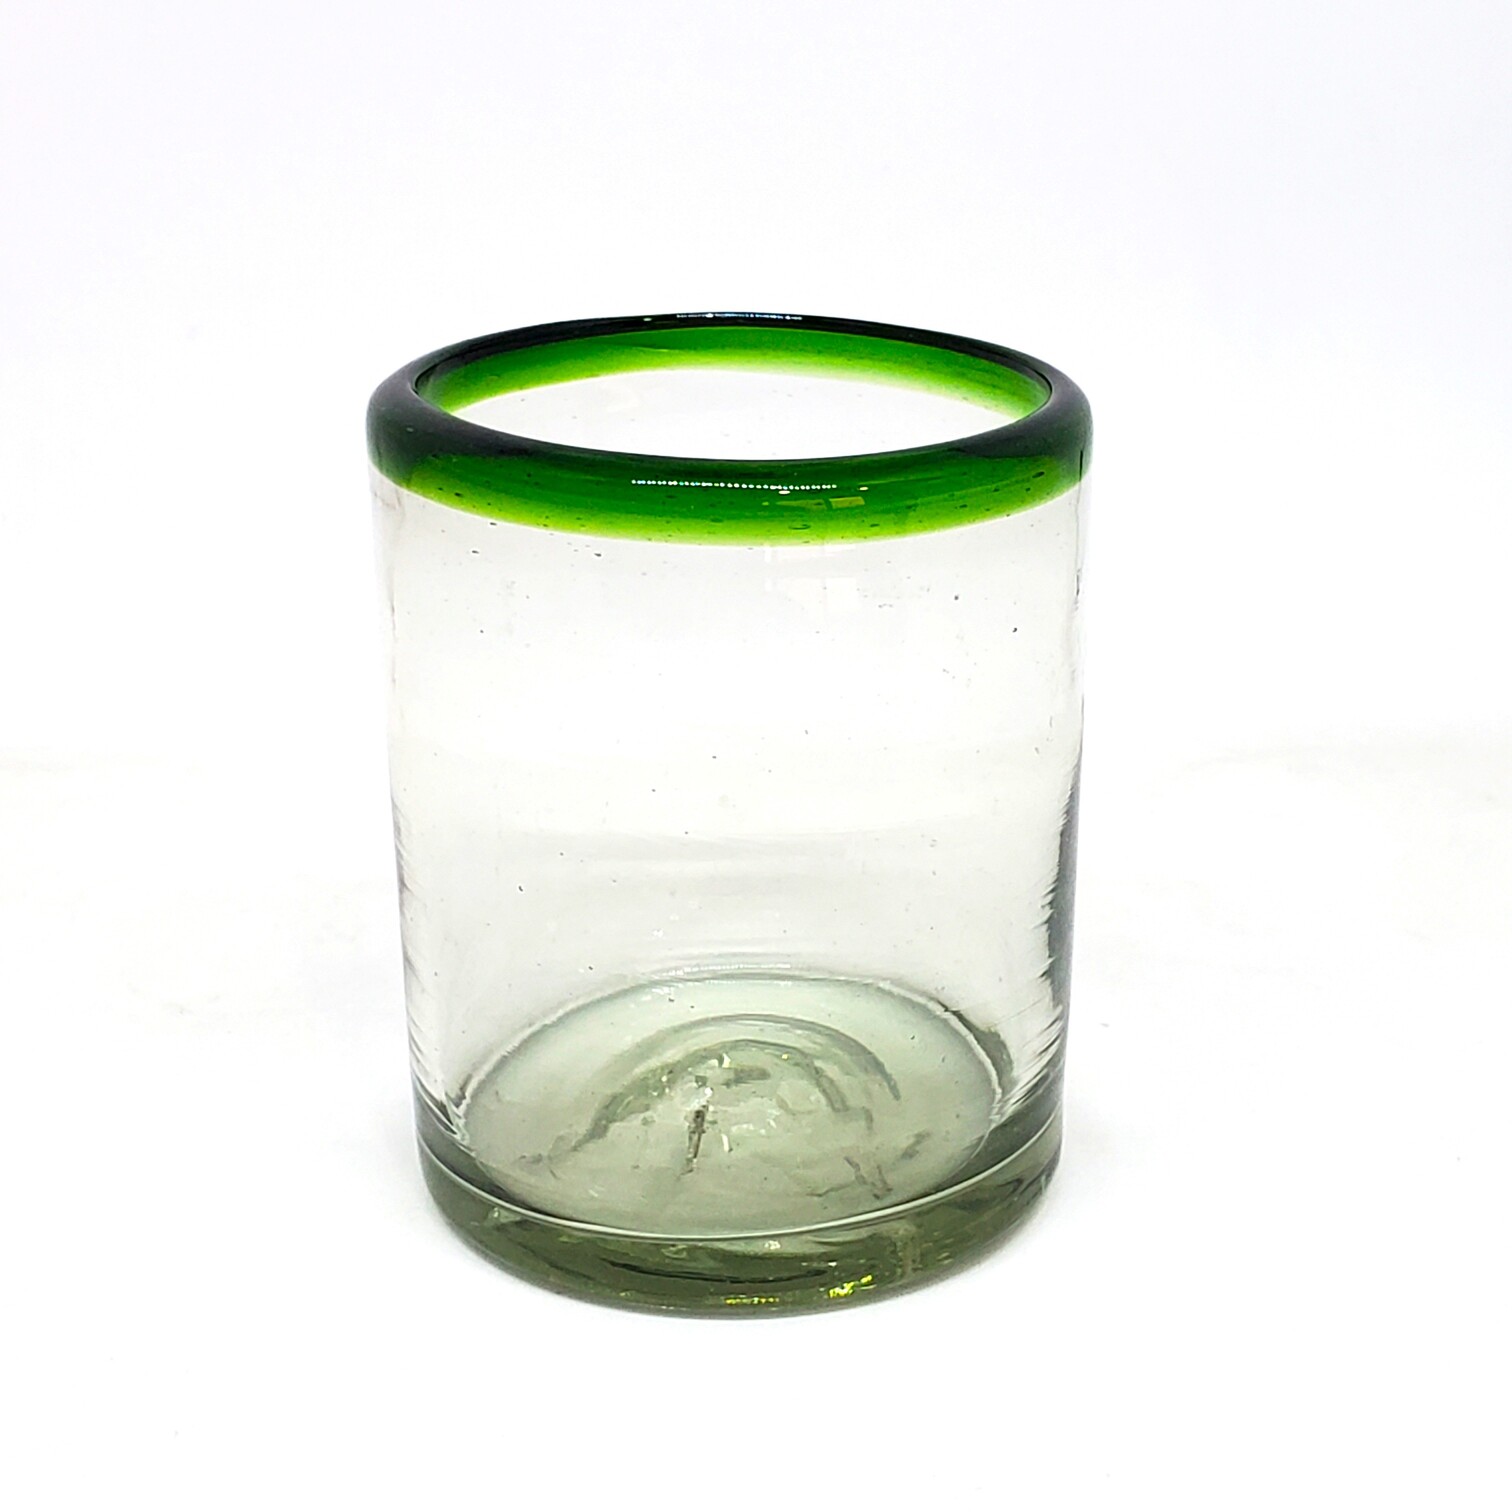 Sale Items / Emerald Green Rim 10 oz Tumblers (set of 6) / This festive set of tumblers is great for a glass of milk with cookies or a lemonade on a hot summer day.